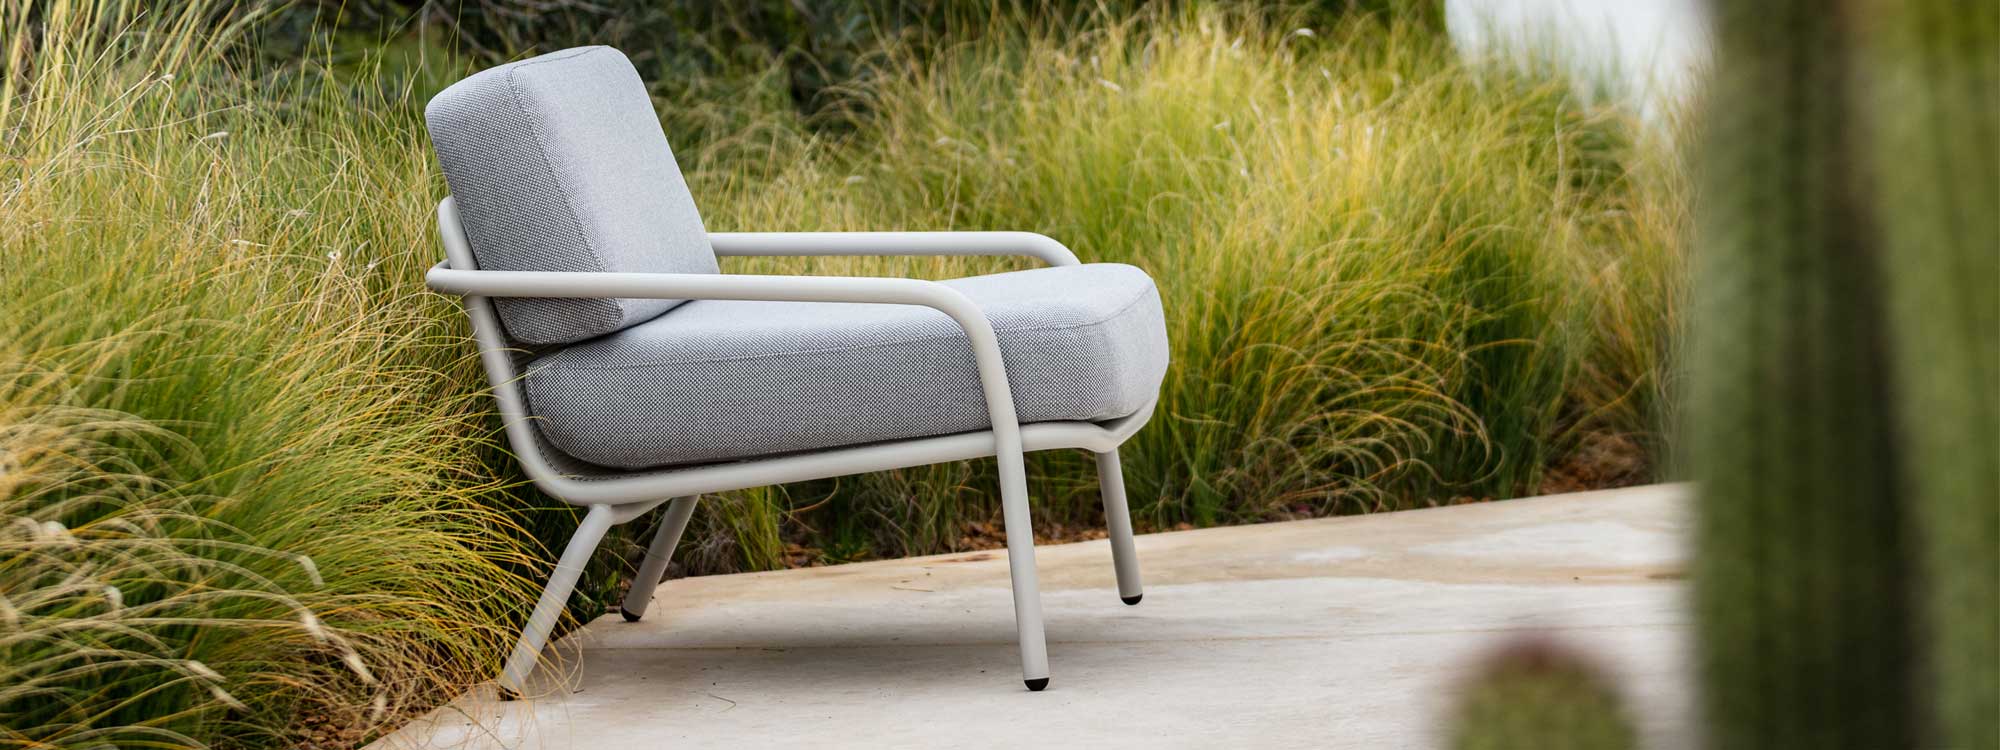 Image of Todus Starling white garden lounge chair with light grey cushions, on terrace surrounded by architectural grasses